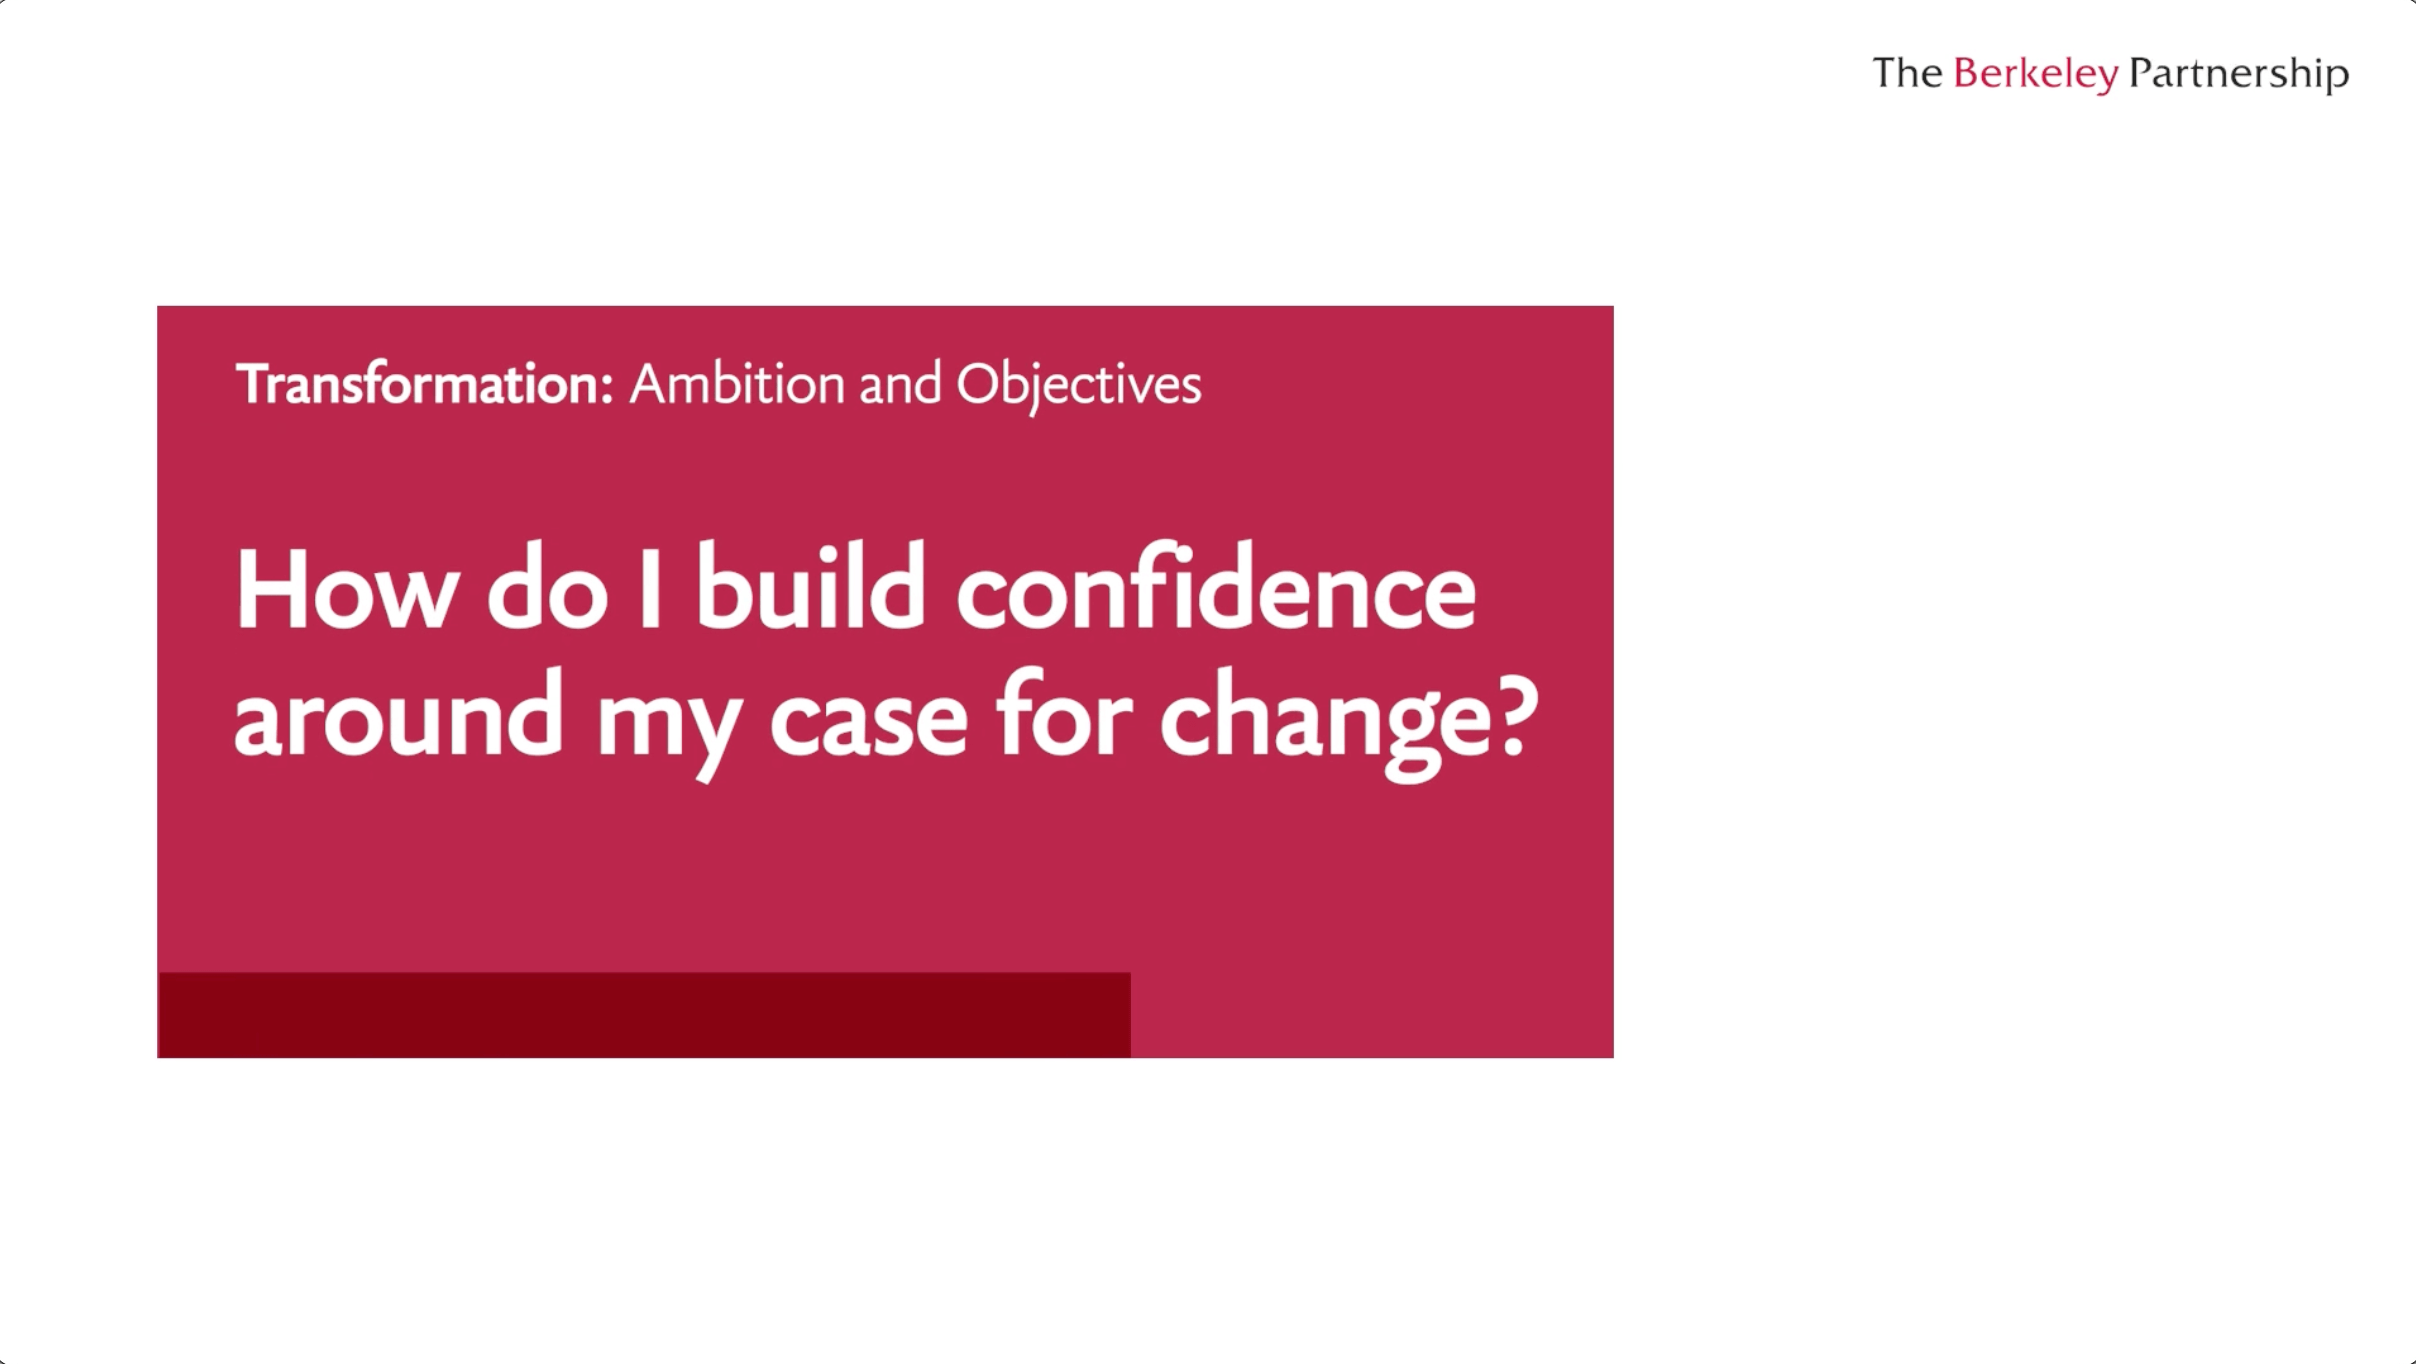 How do I build confidence around my case for change?